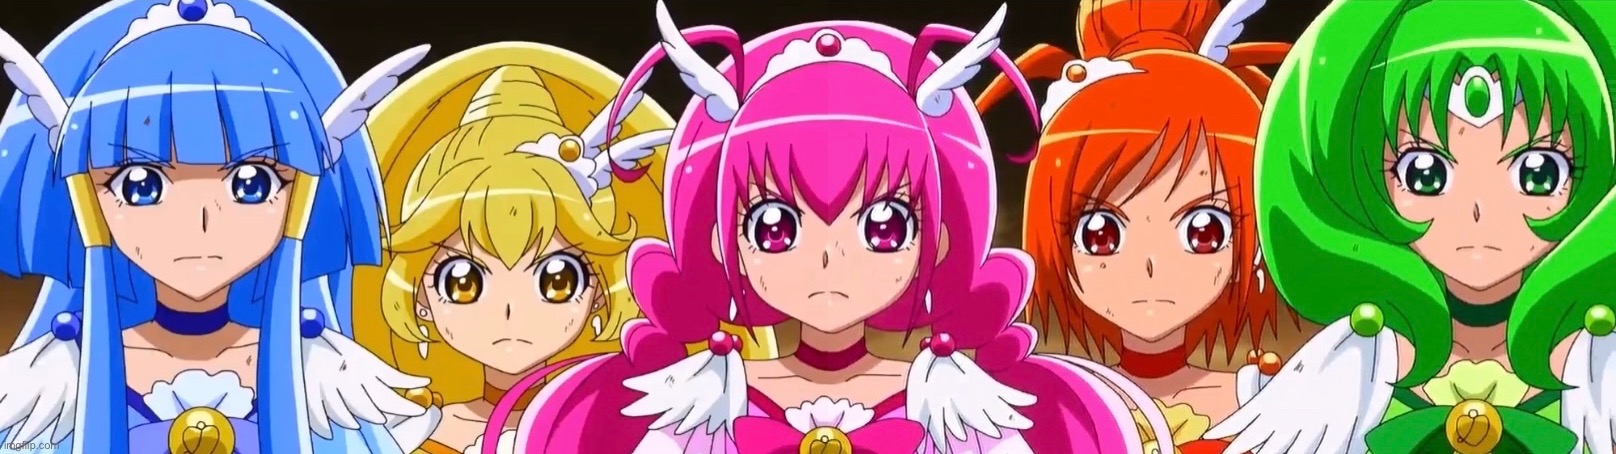 Why is the Smile! team mad? (Wrong answers only) | image tagged in precure,smile precure | made w/ Imgflip meme maker